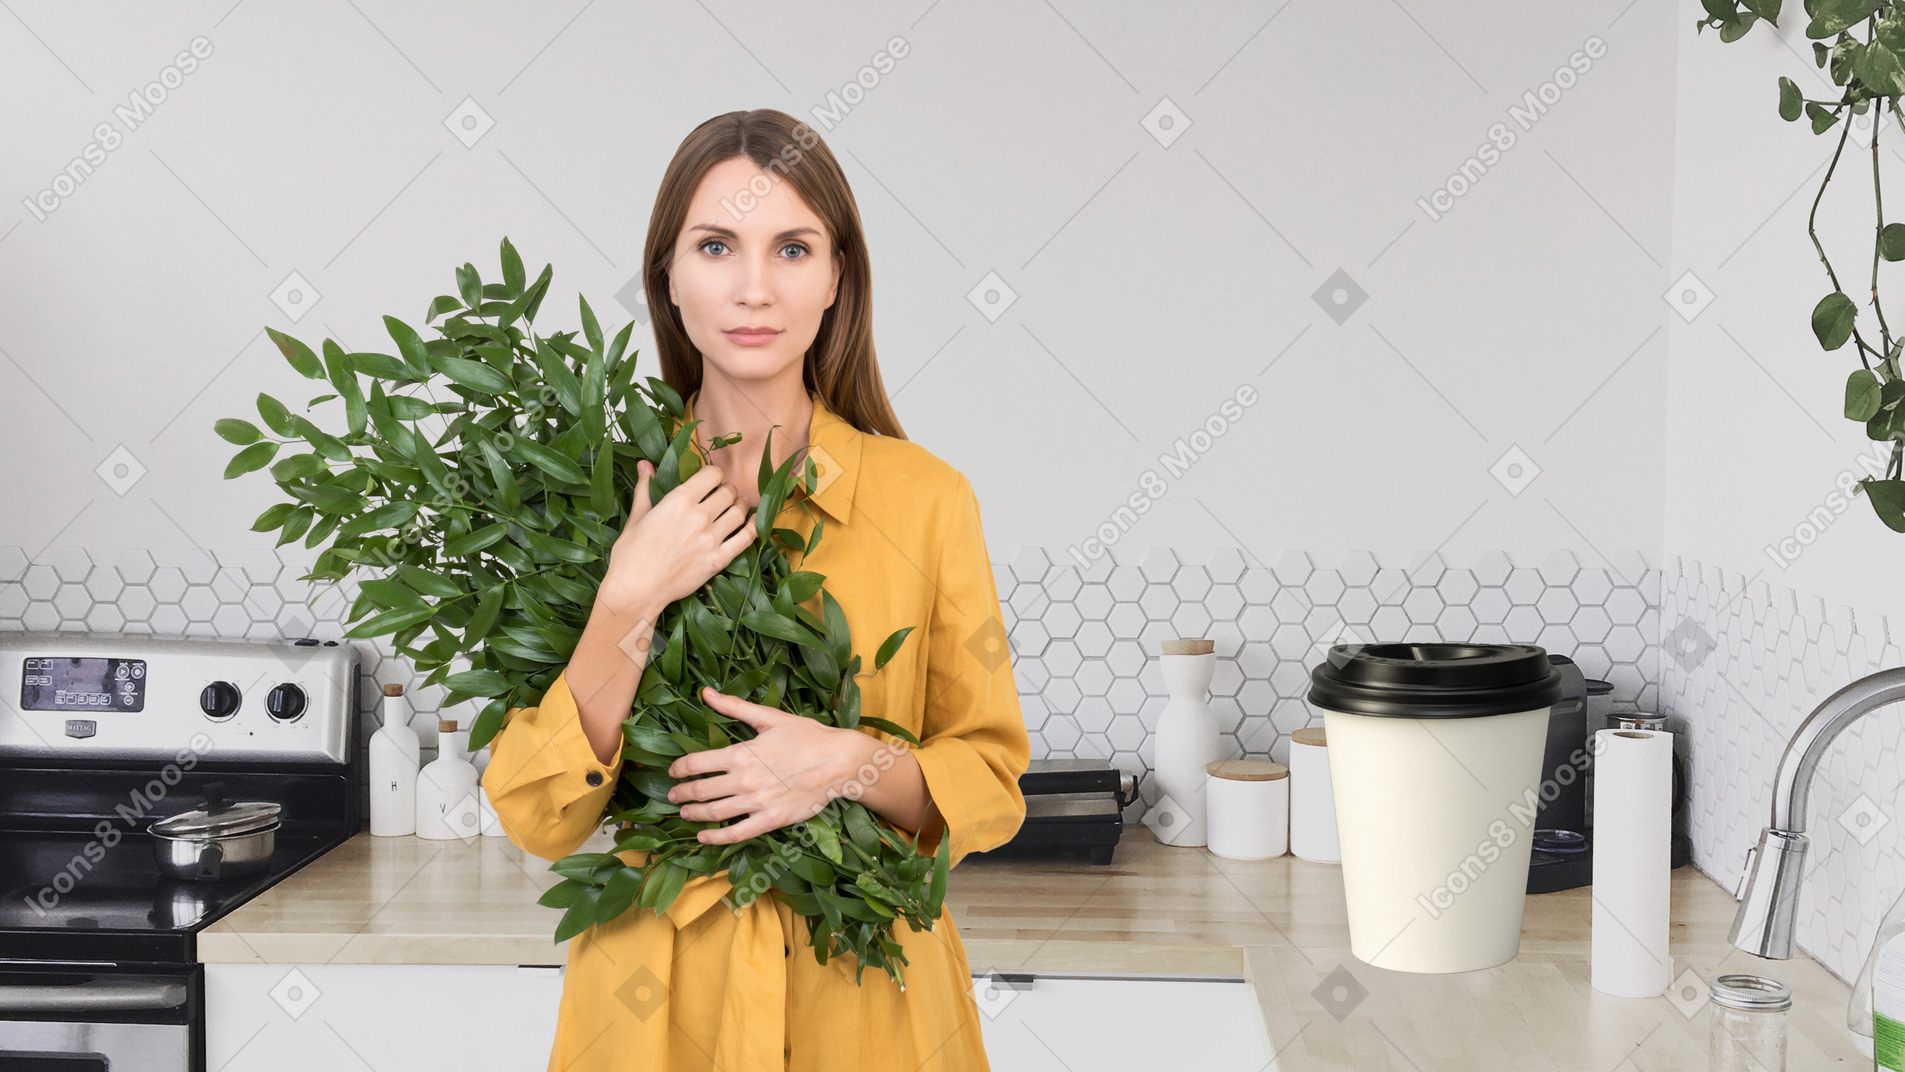 A woman holding a plant in a kitchen